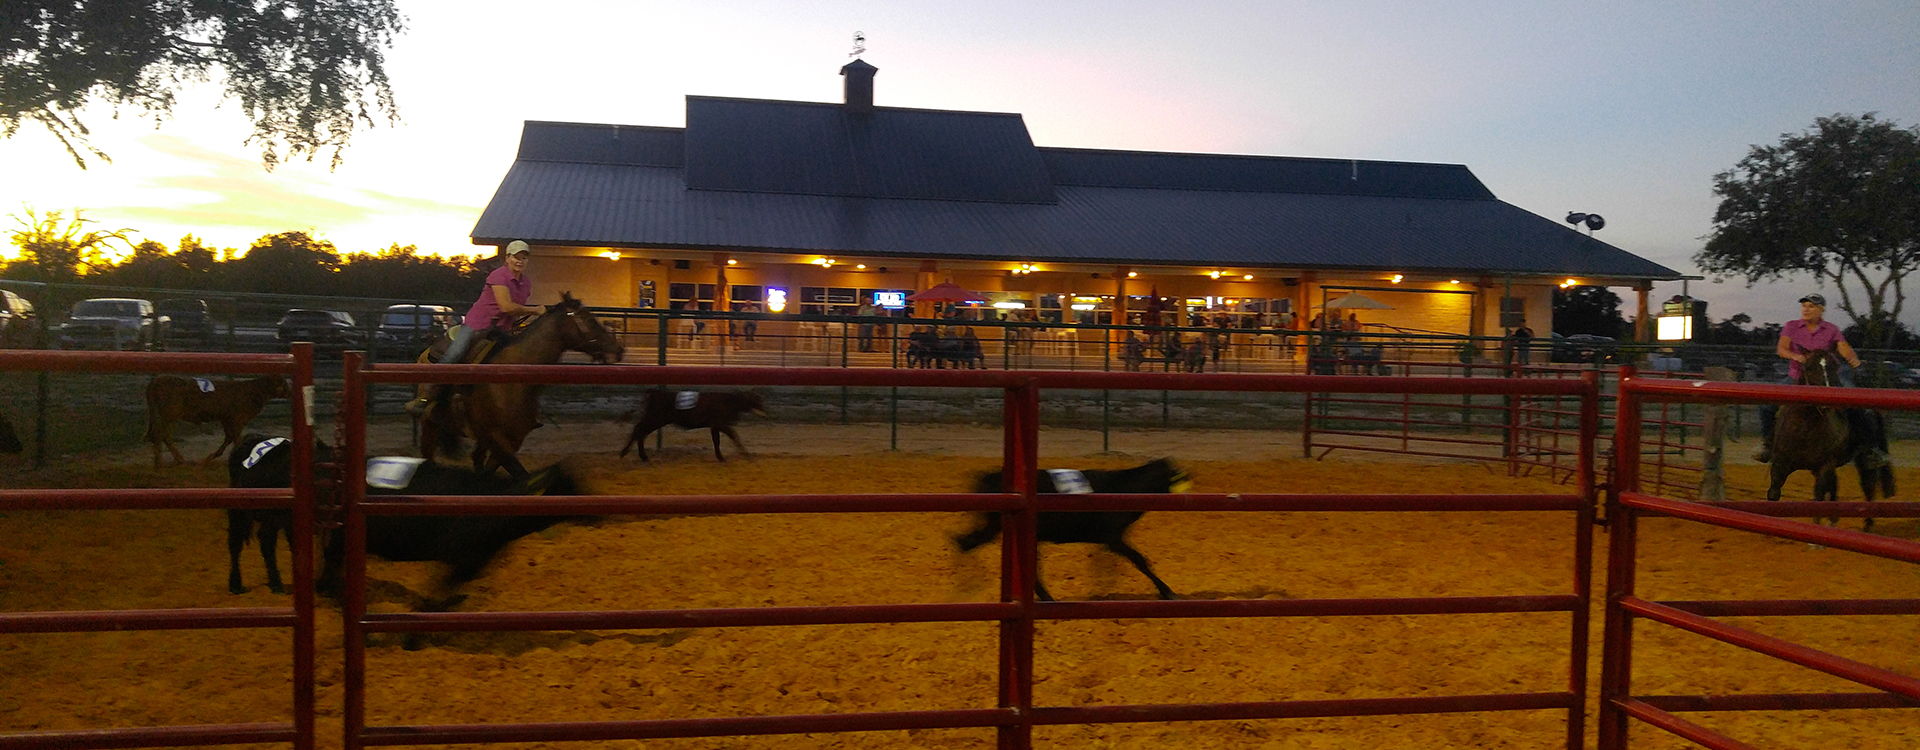 The Gravity Check Saloon and Arena in Kerrville, Texas hosts rodeo events, ranch sorting, barrel racing and others.